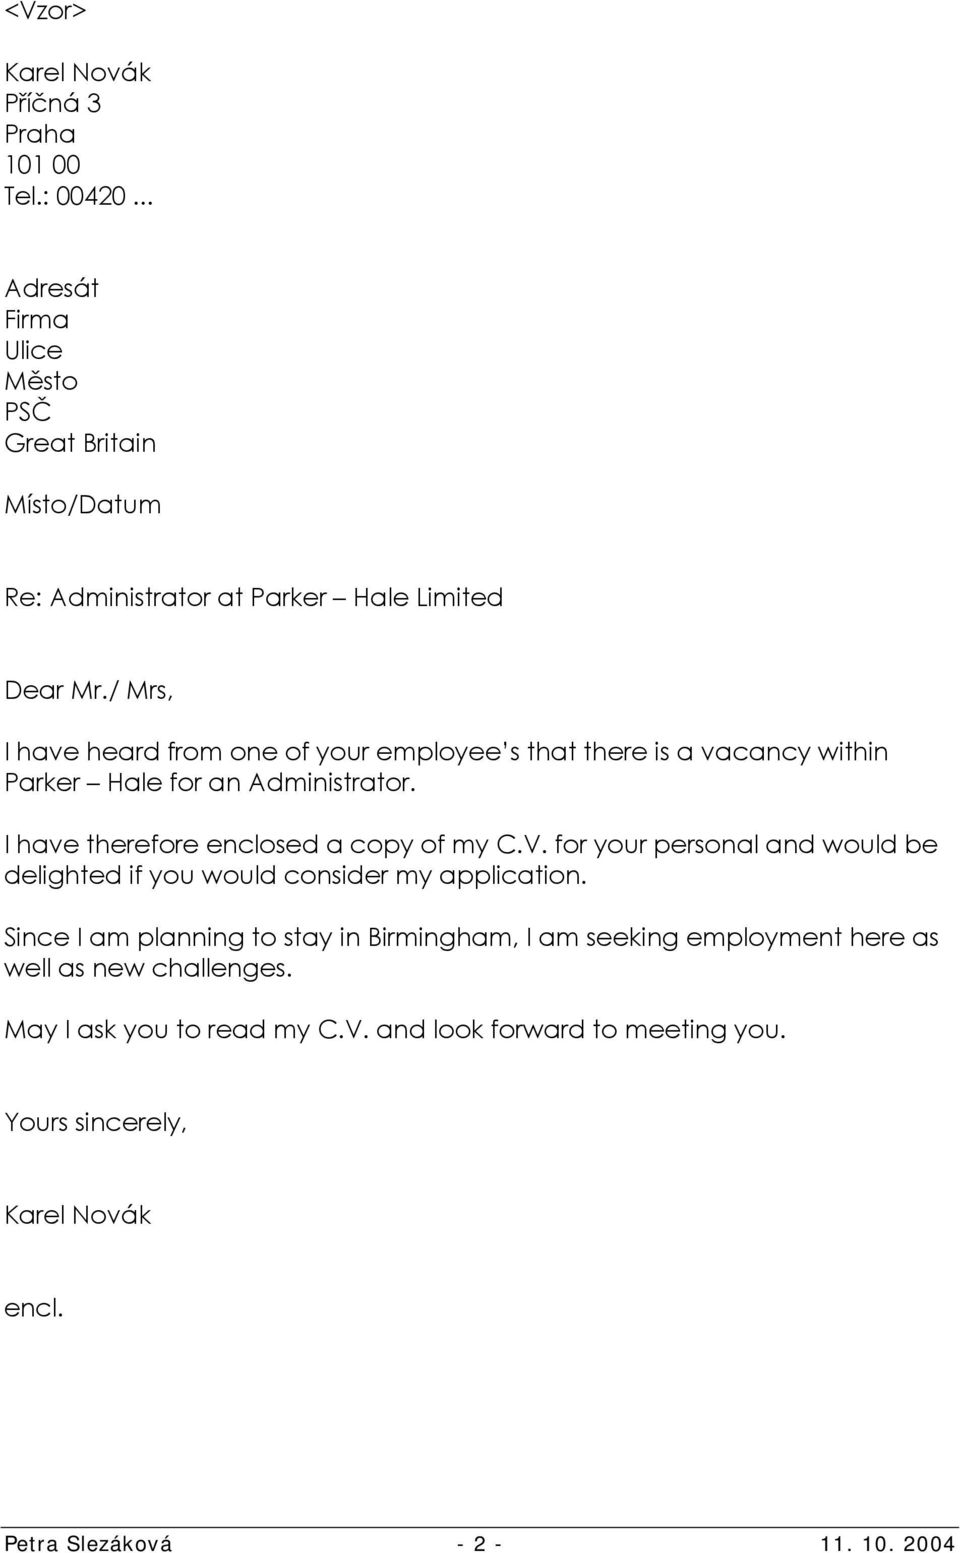 I have therefore enclosed a copy of my C.V. for your personal and would be delighted if you would consider my application.